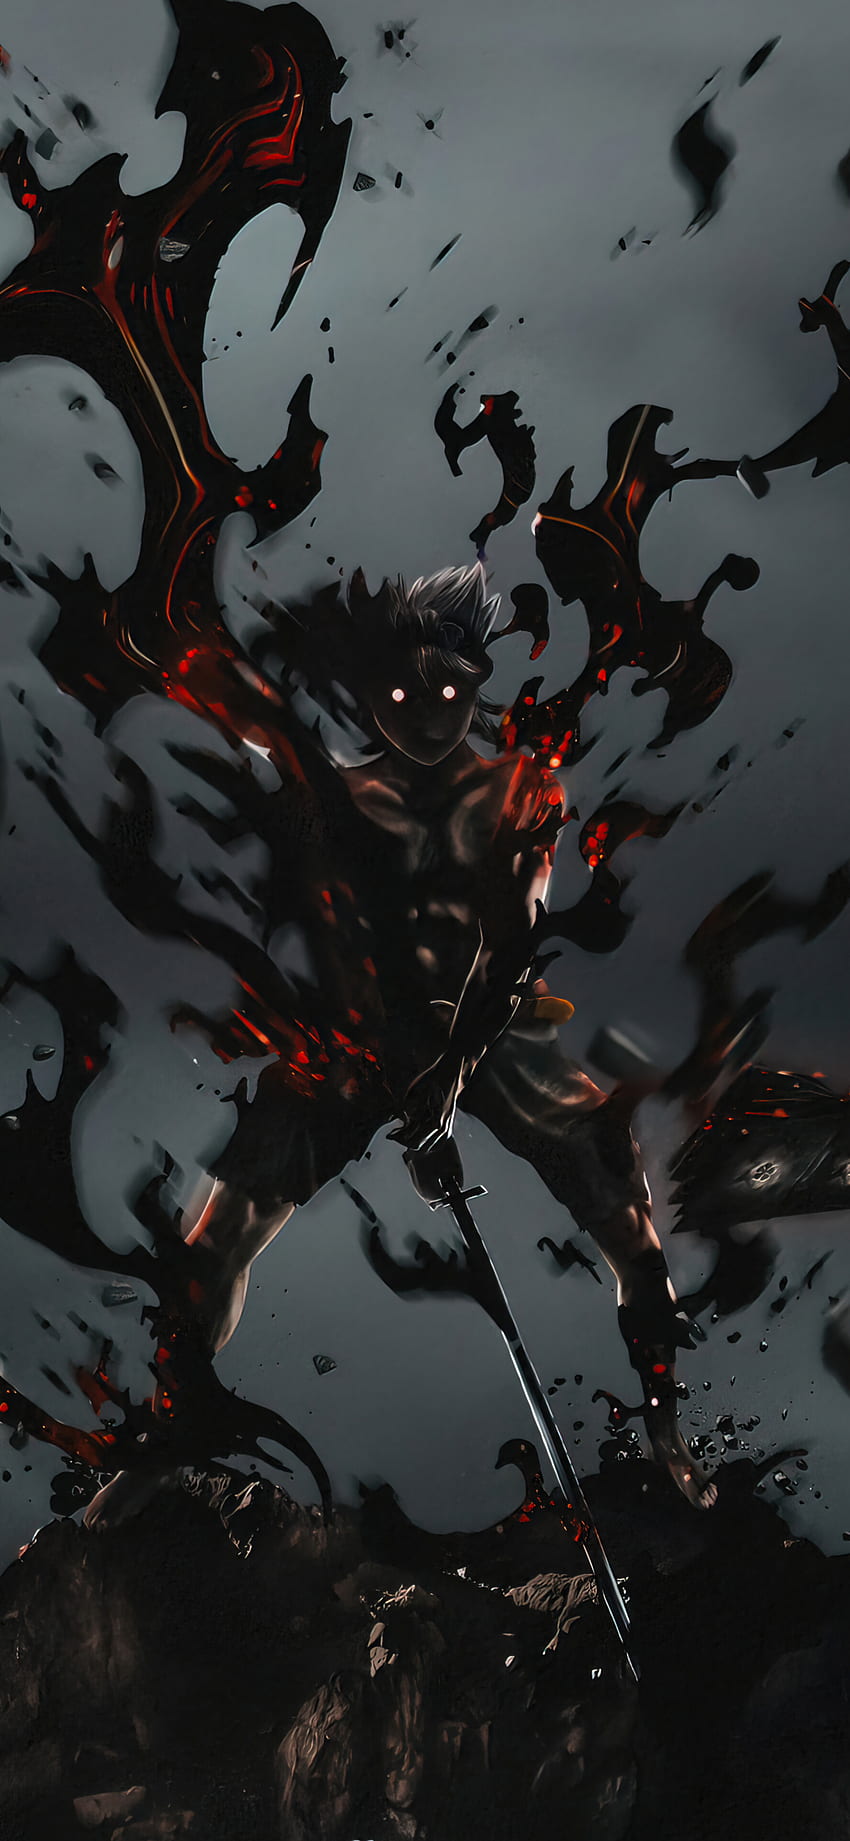 Asta Black Clover Phone iPhone 4970b [] for your , Mobile & Tablet. Explore Black Clover Phone . Black Clover , Asta Black Clover, Dark Smartphone HD phone wallpaper